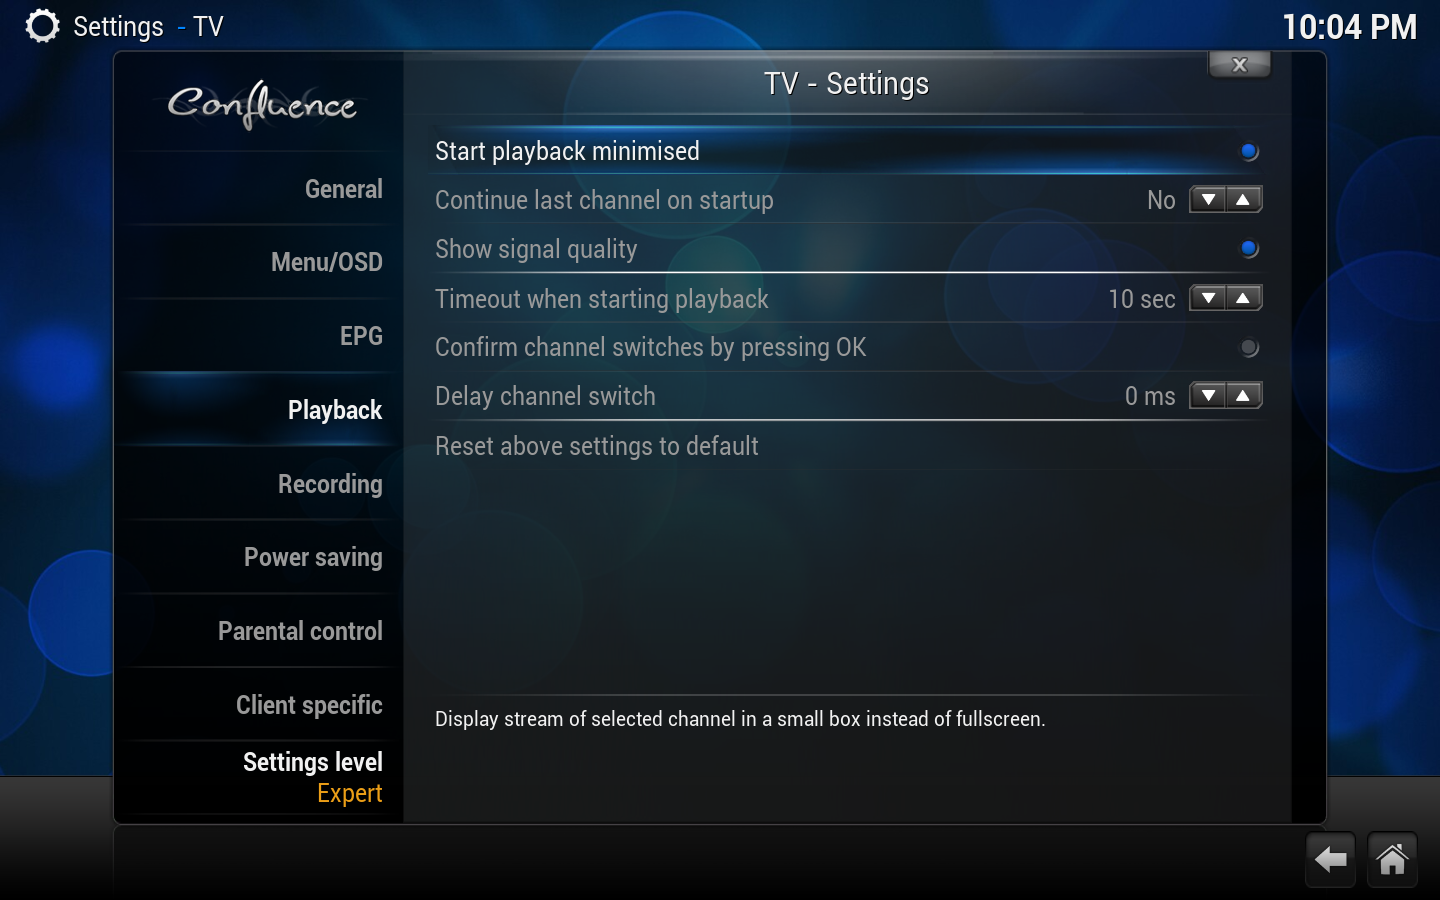 File:Settings.PVR.Playback.png